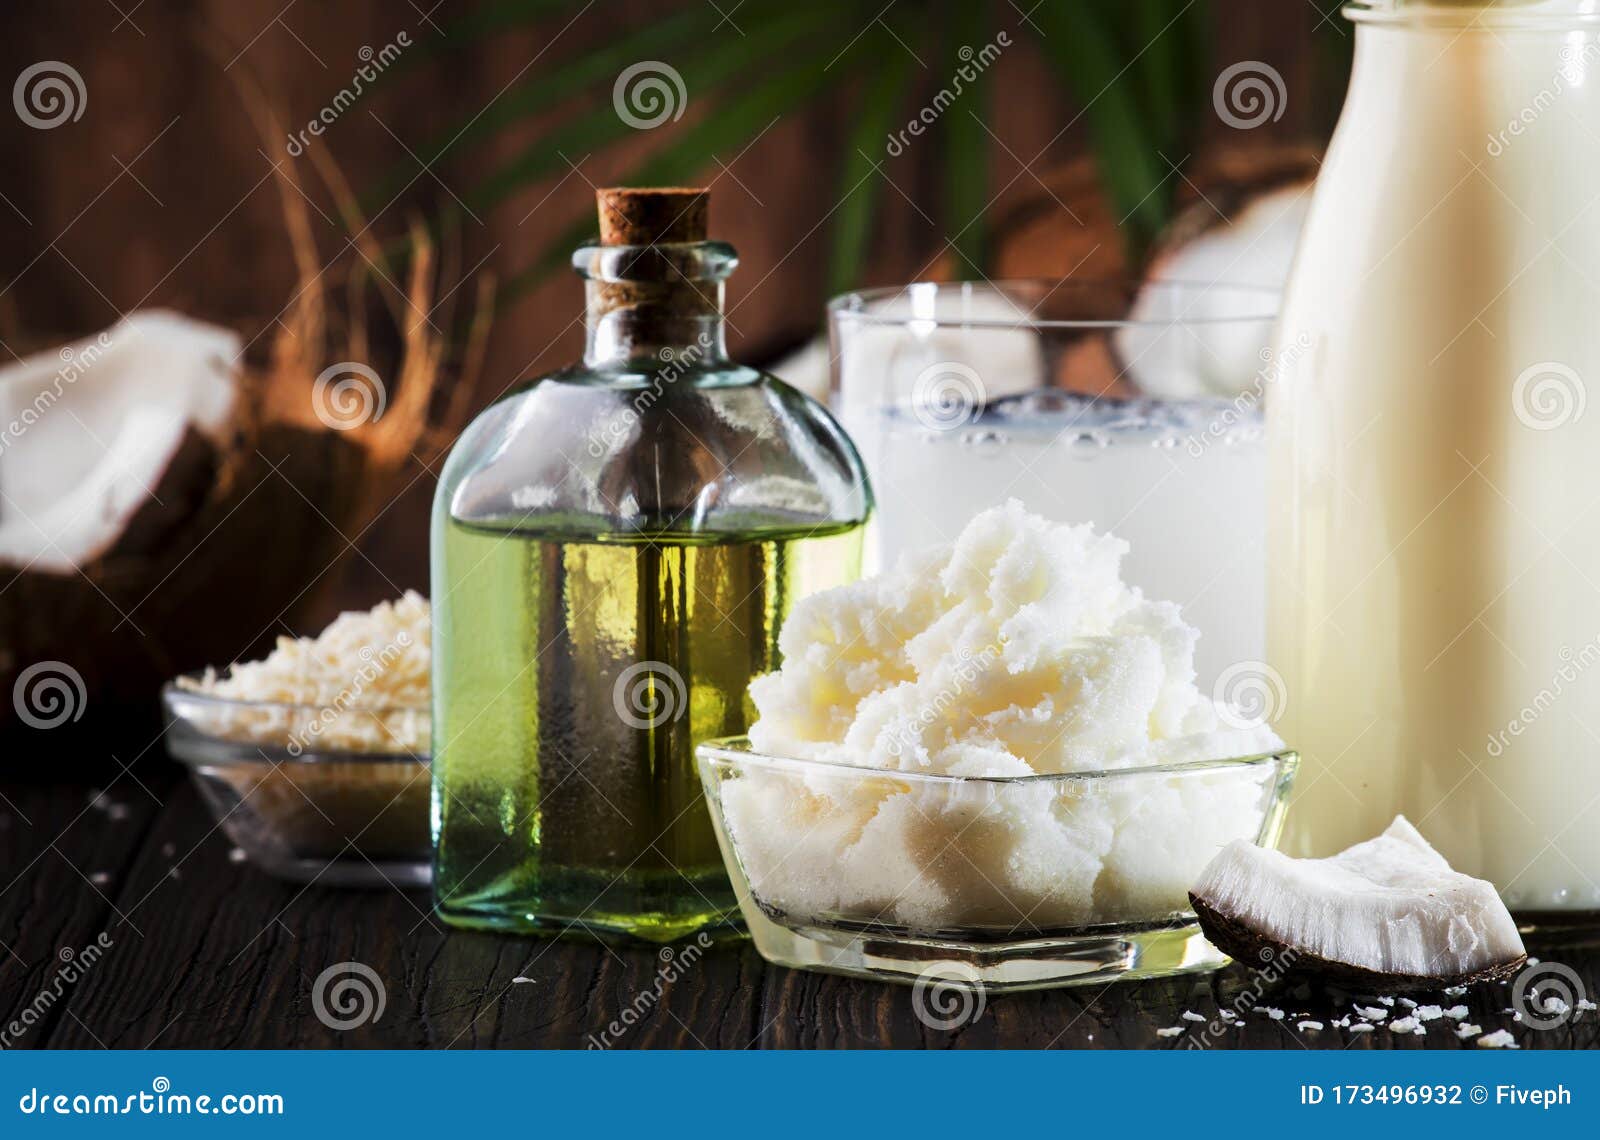 Coconuts Products Mct Butter Oil Milk Oil Shavings On Wooden